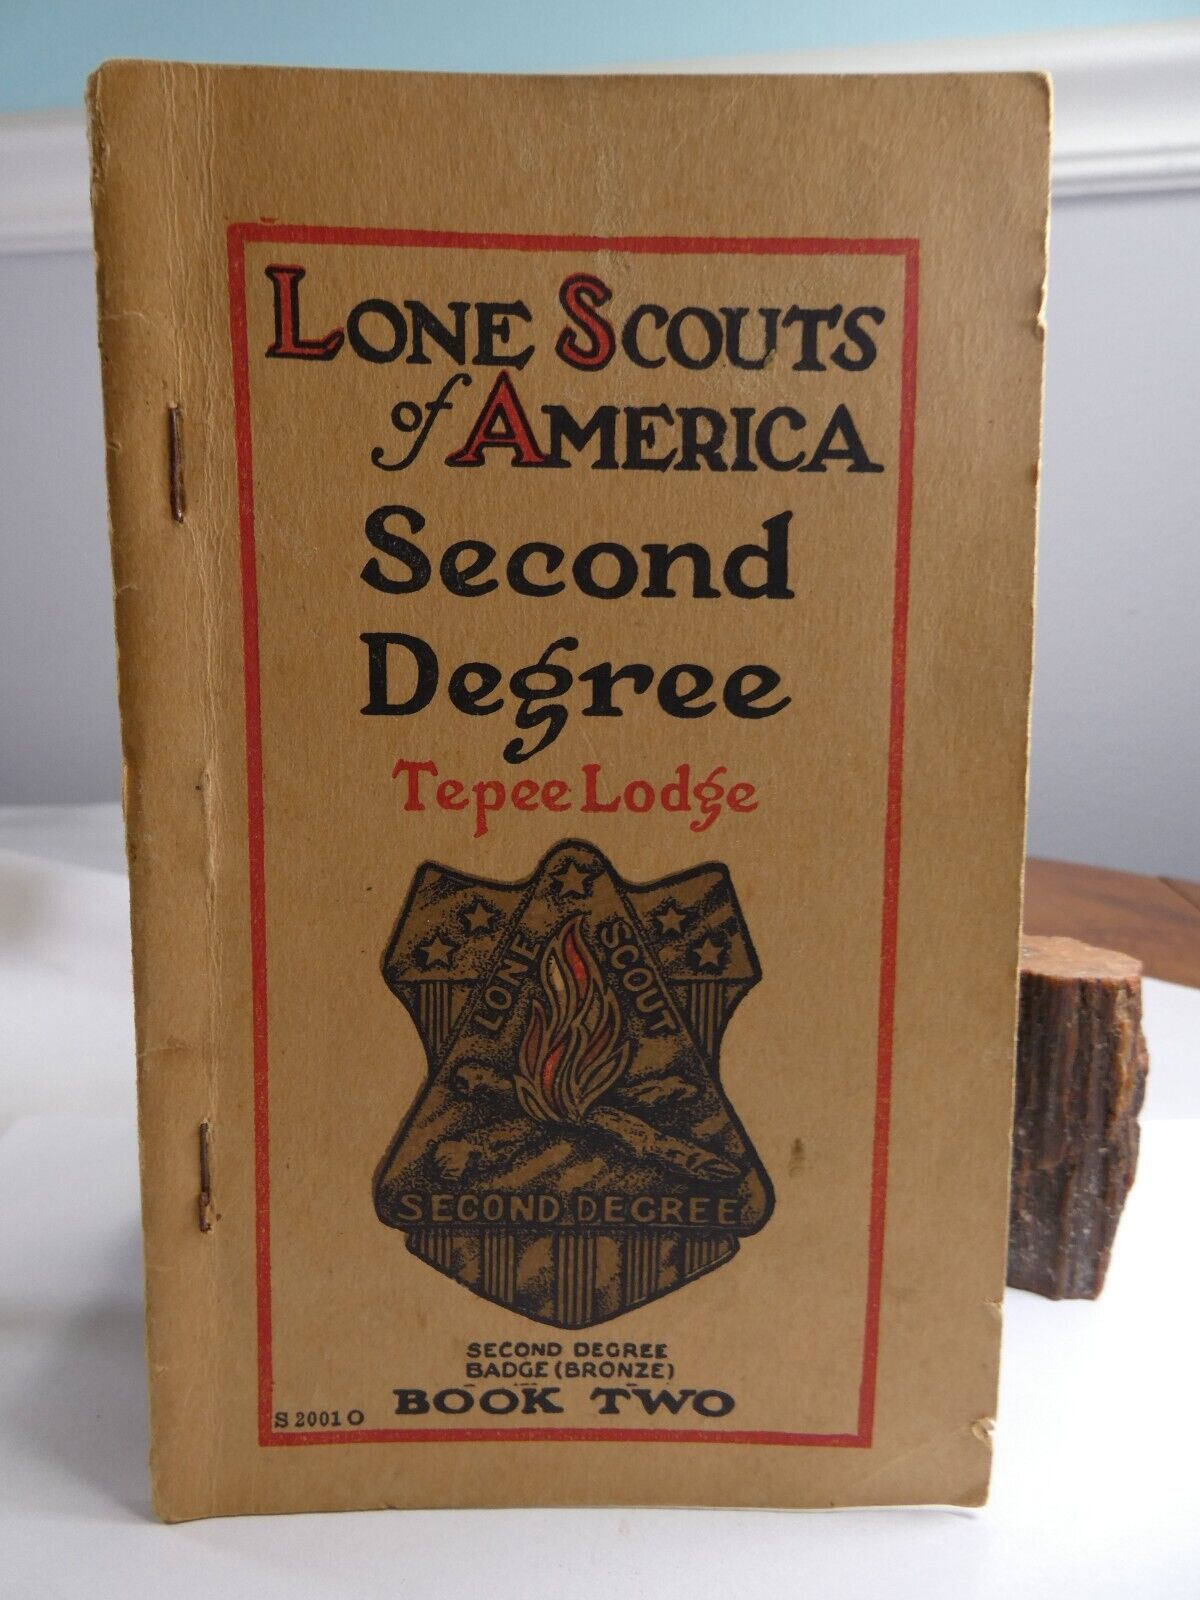 Lone Scouts of America Second Degree Tepee Lodge Book Two